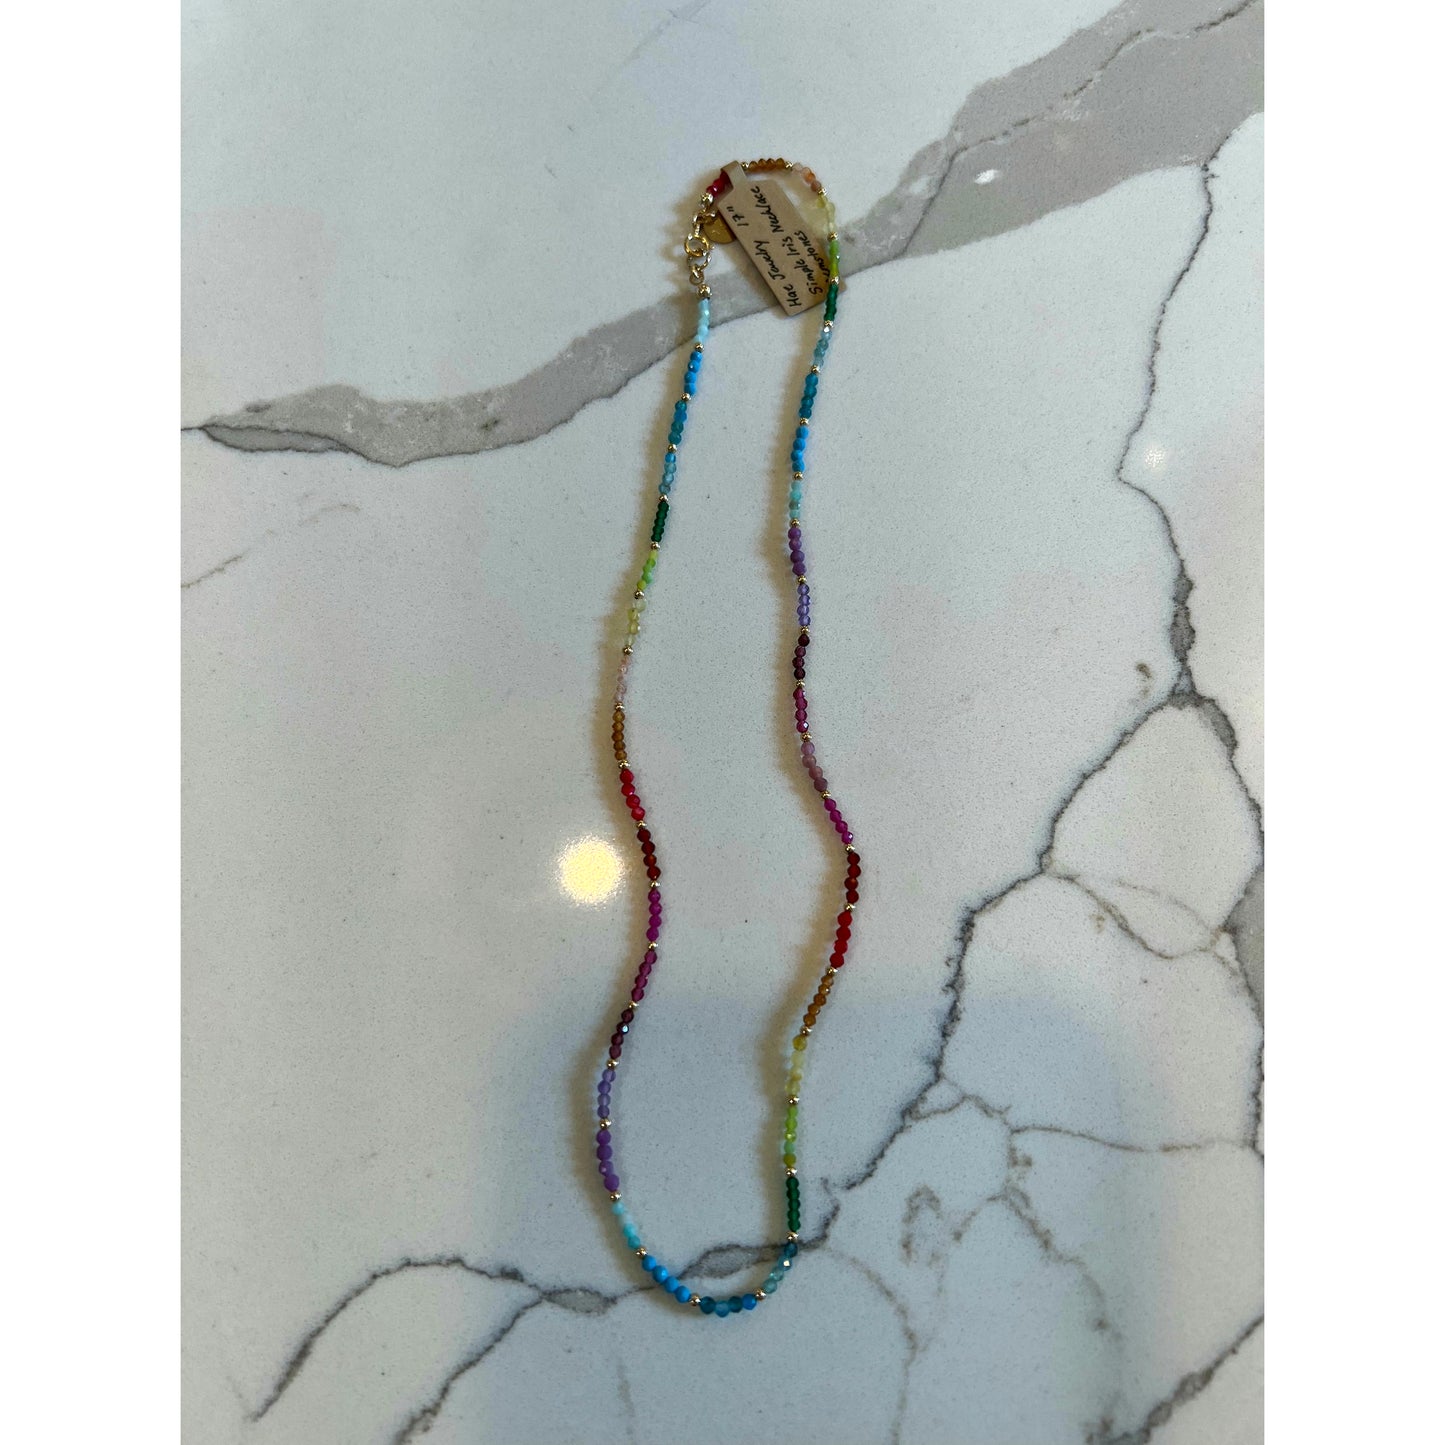 Load image into Gallery viewer, Rainbow Necklace
